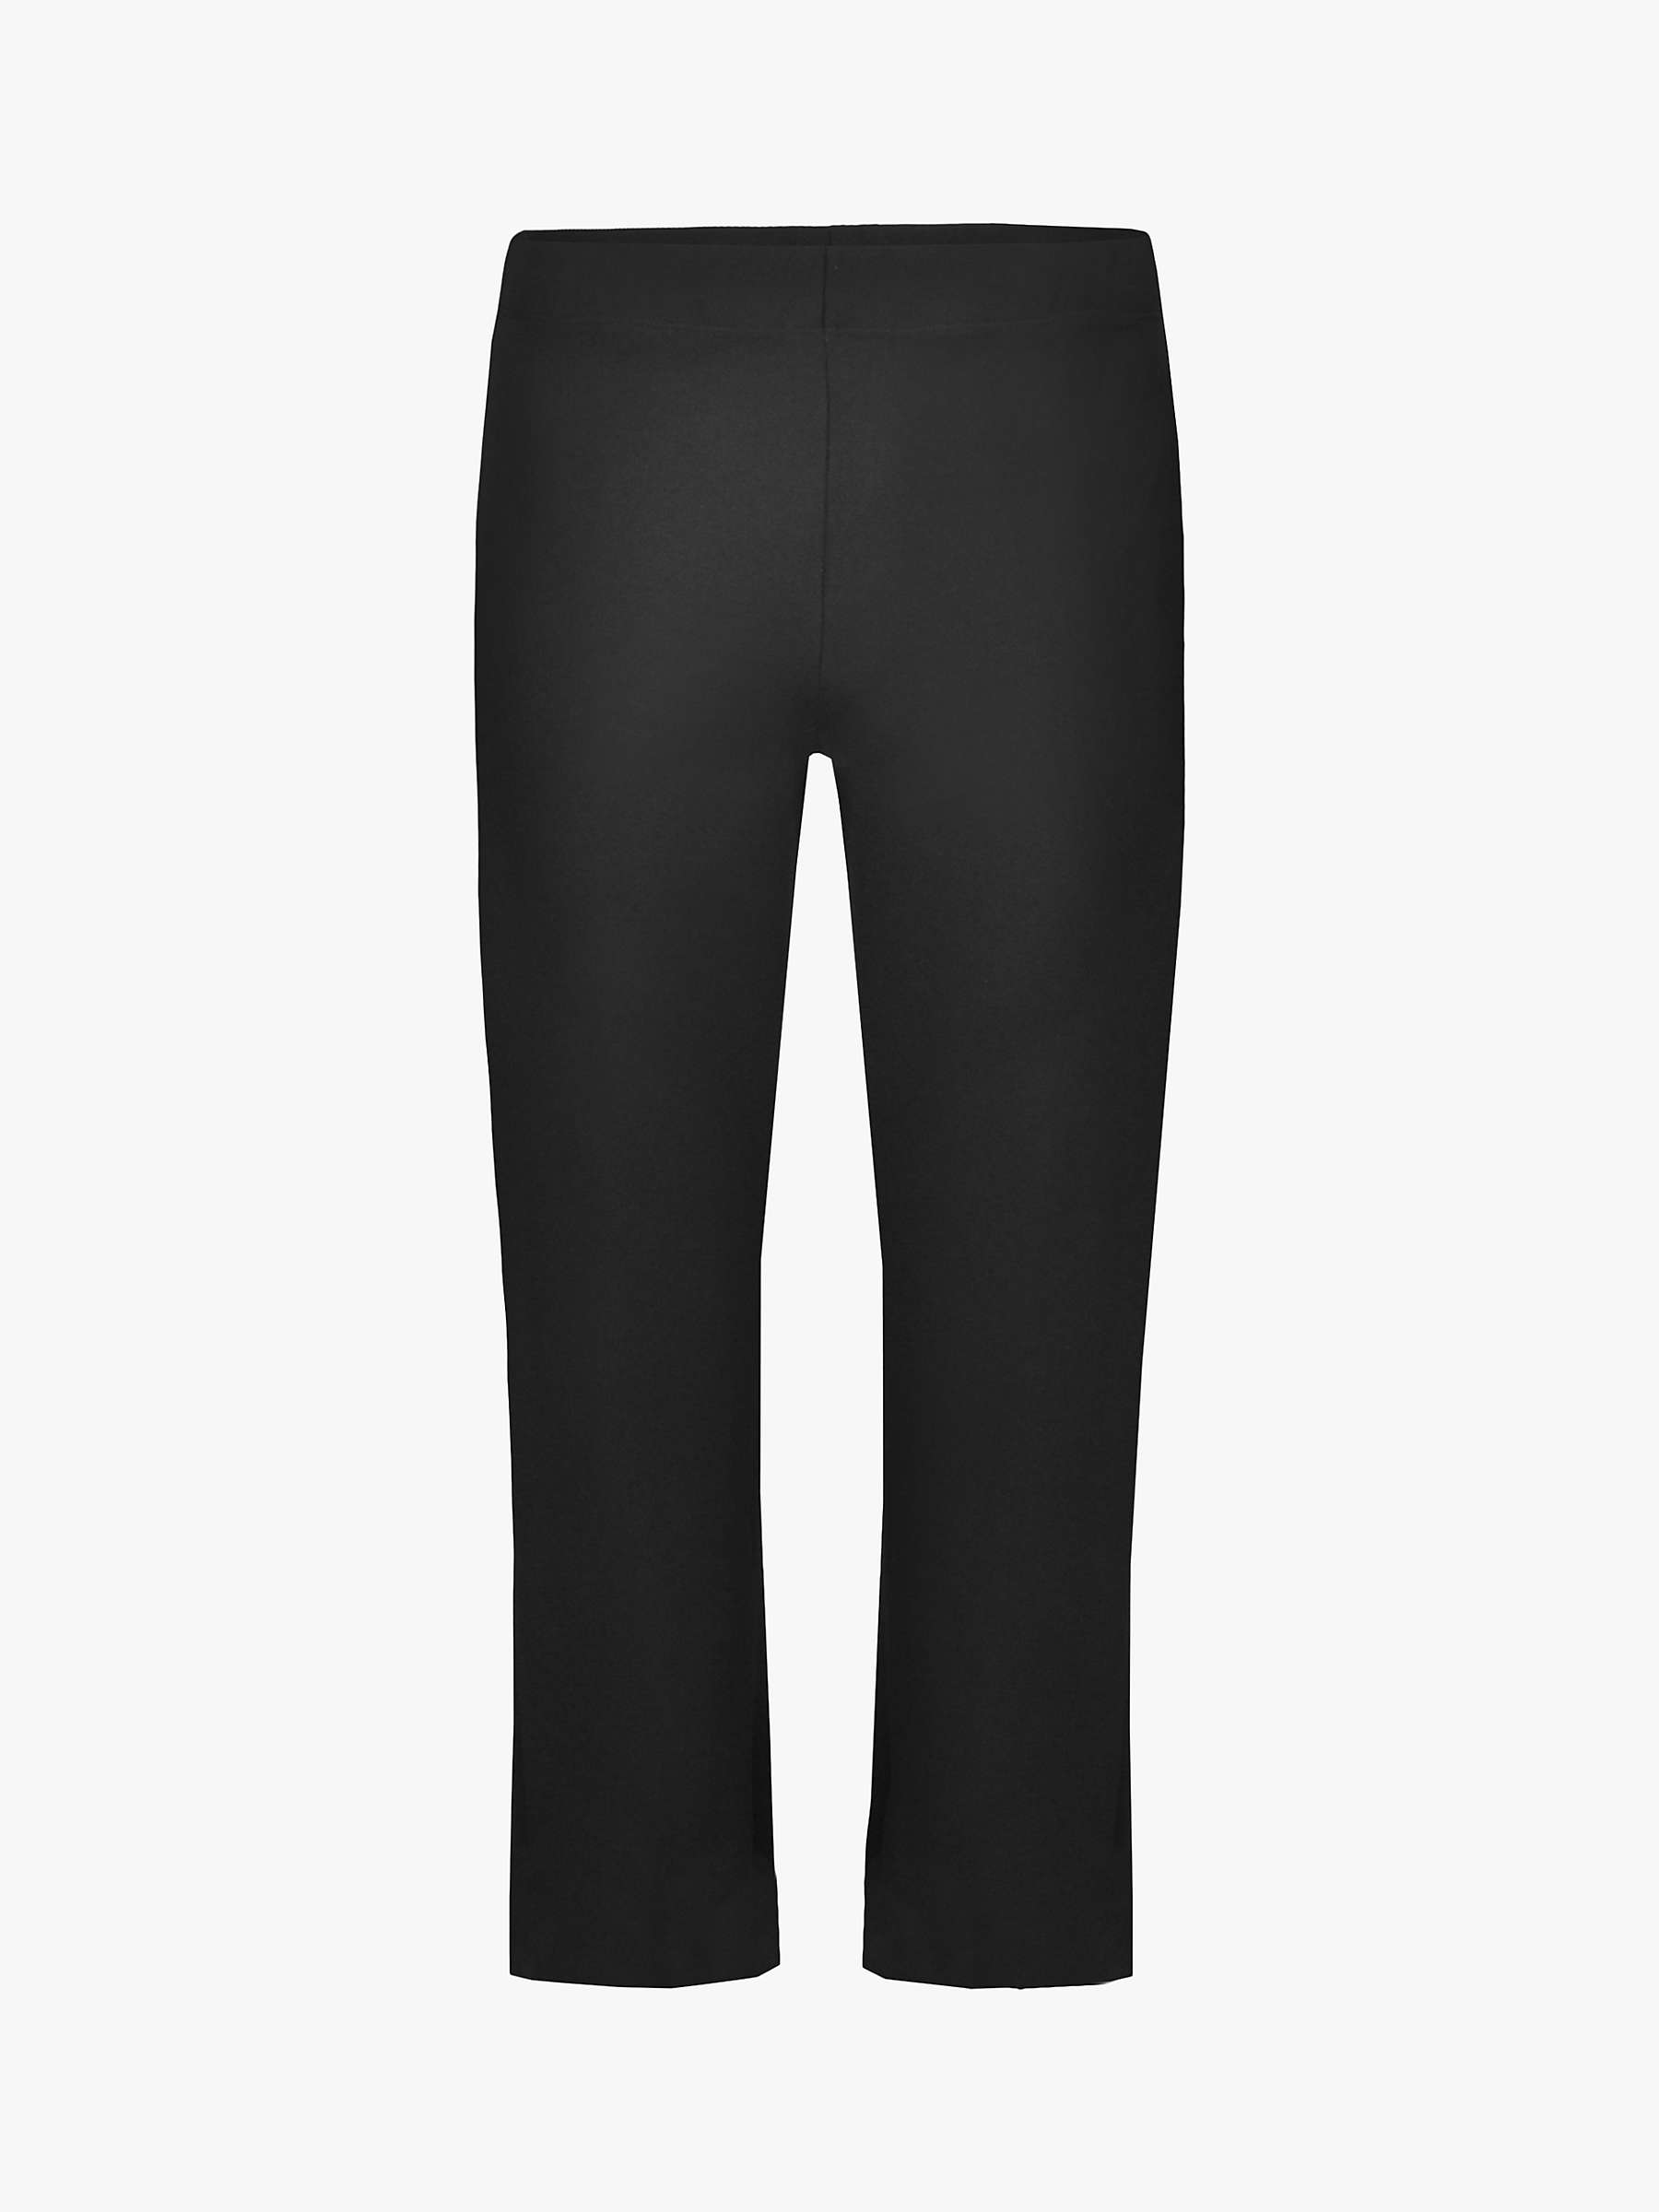 Buy Live Unlimited Curve Palazzo Wide Leg Trousers, Black Online at johnlewis.com